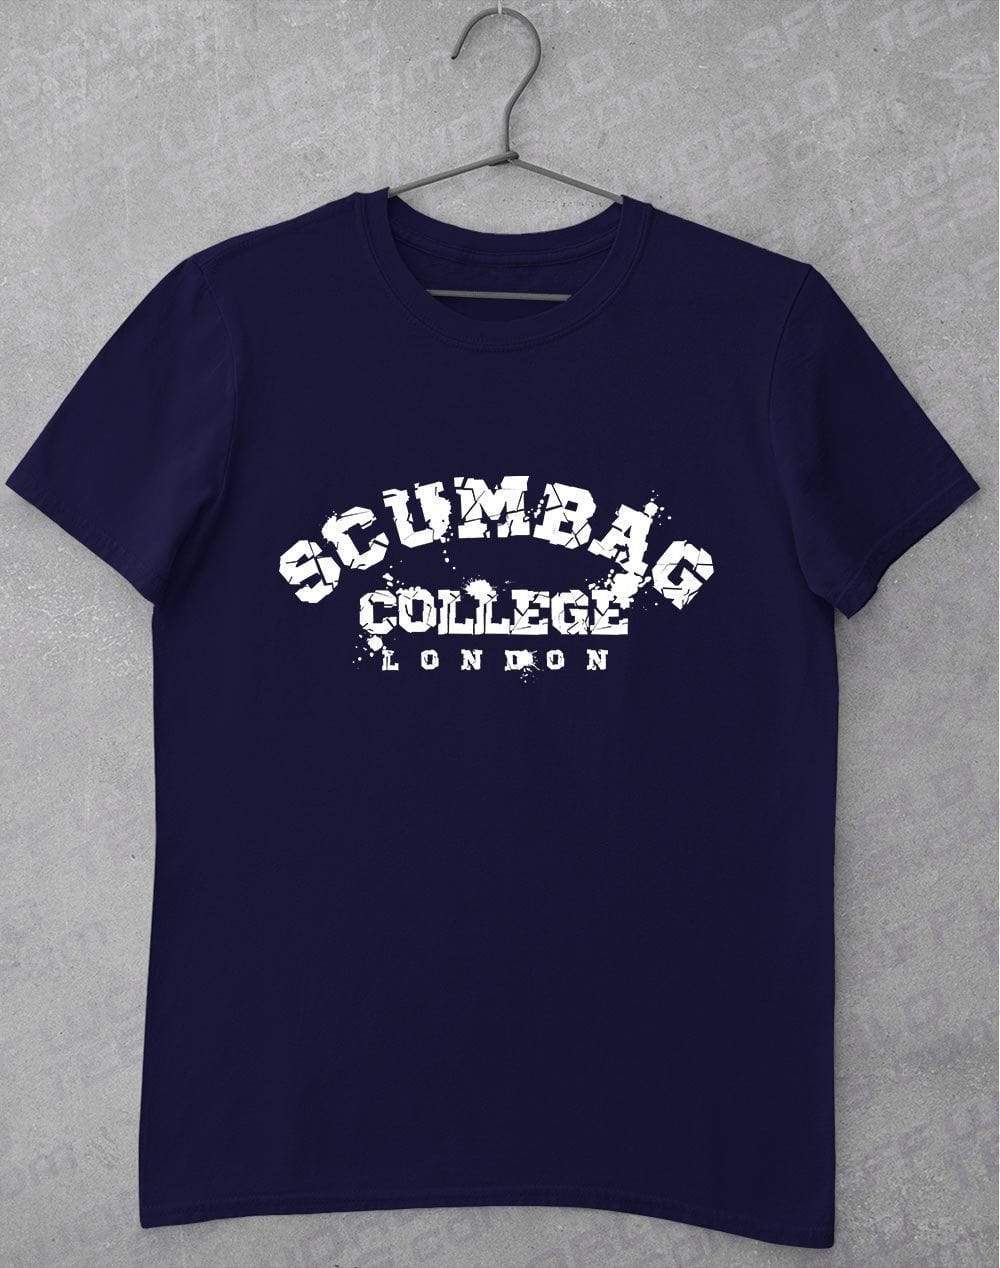 Scumbag College T-Shirt S / Navy  - Off World Tees